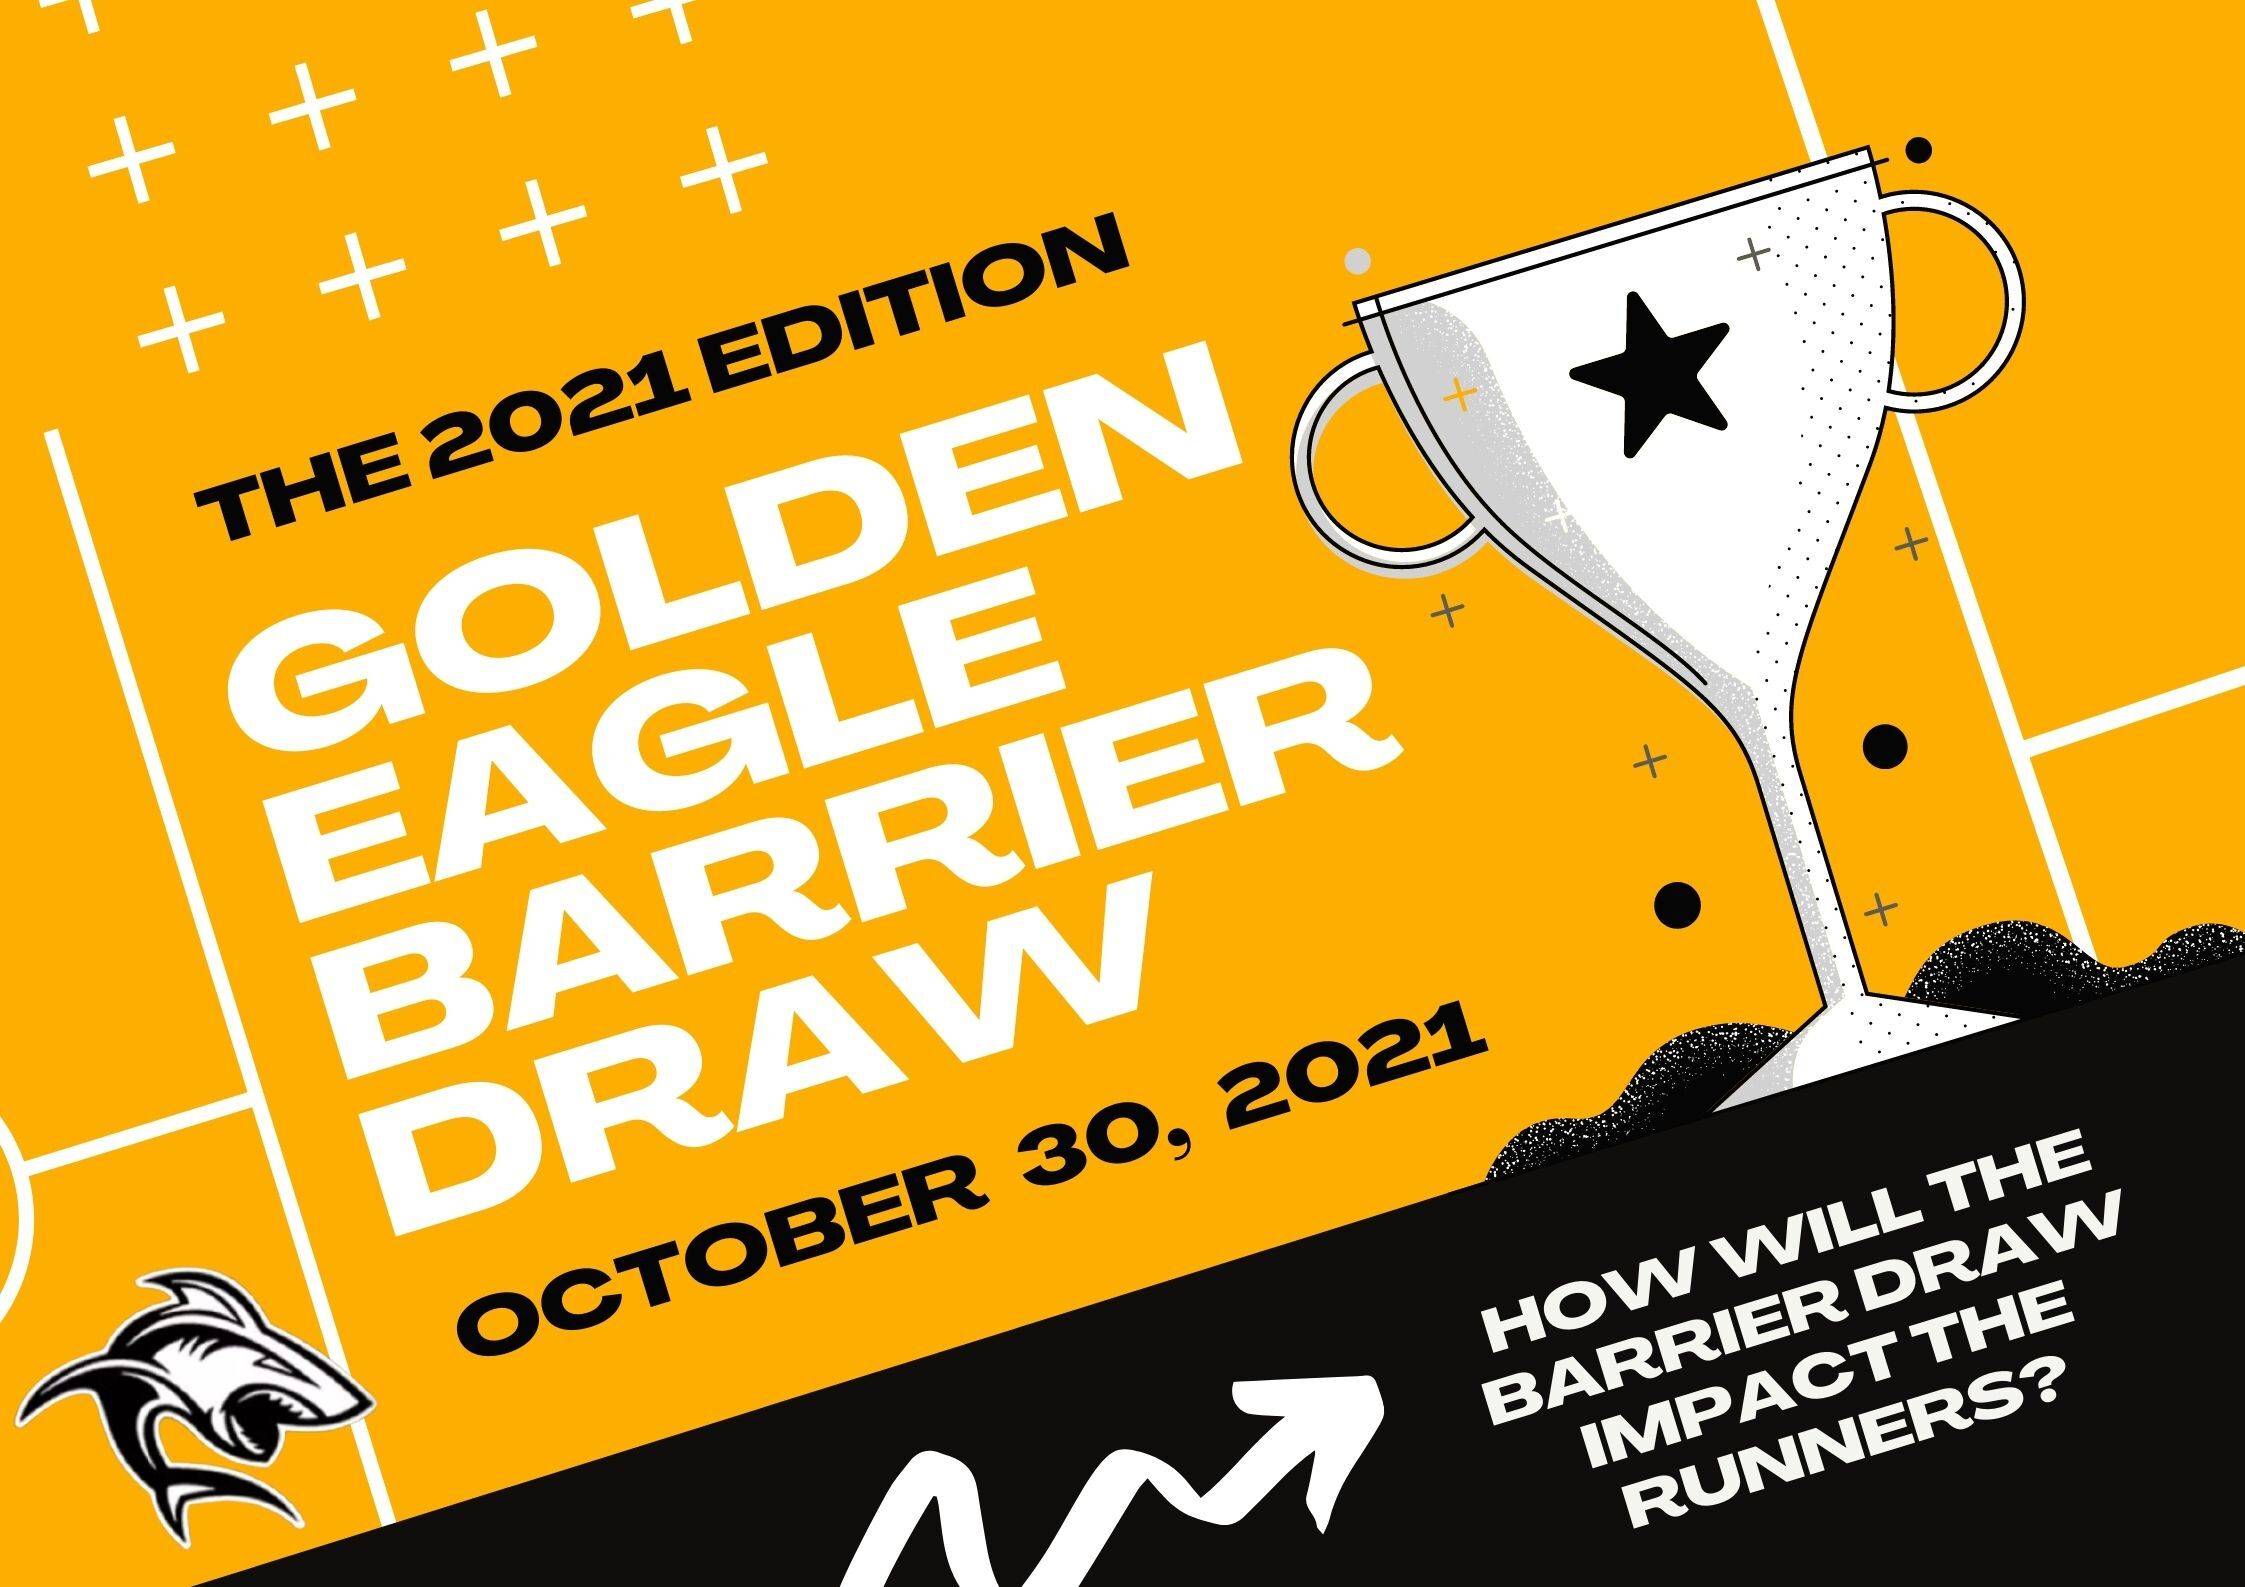 I’m Thunderstruck Has Every Chance Following The 2021 Golden Eagle Barrier Draw